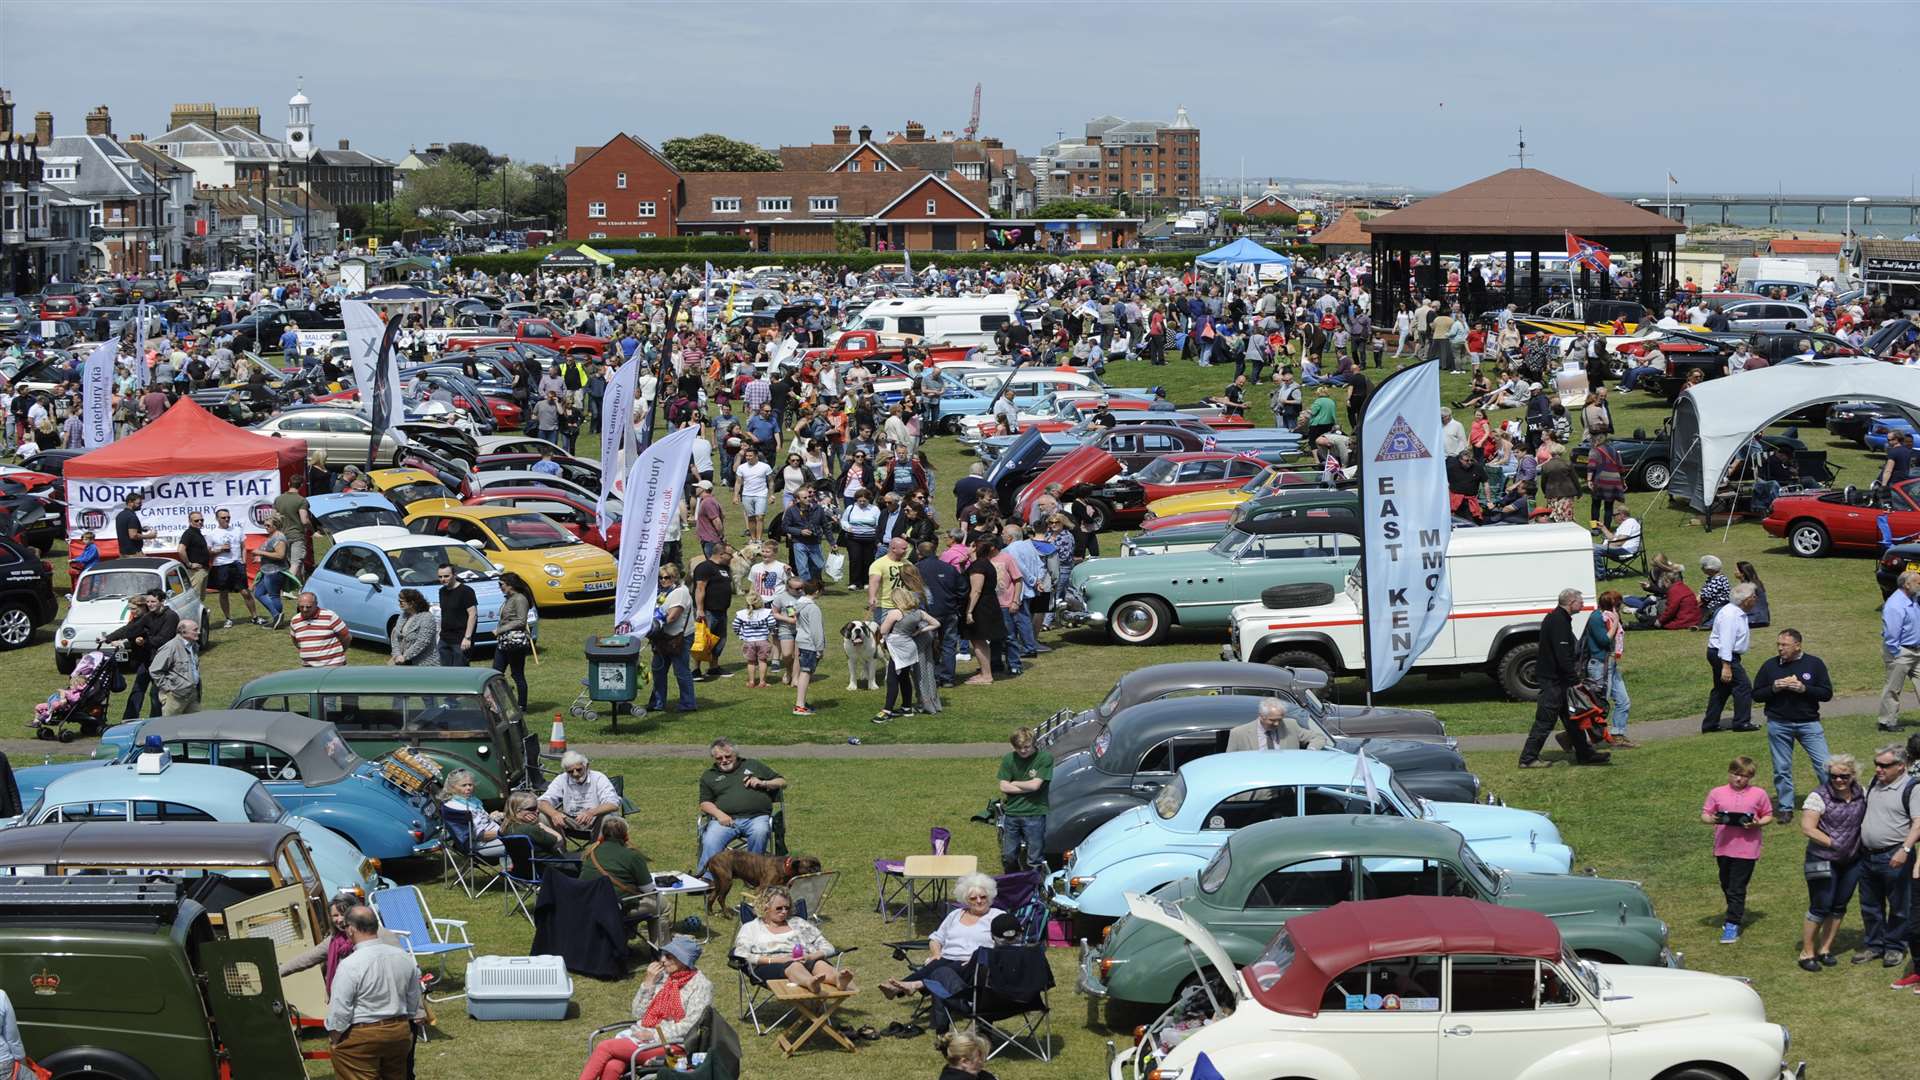 Walmer Green will host the Classic Motor Show tomorrow (Saturday) with live music